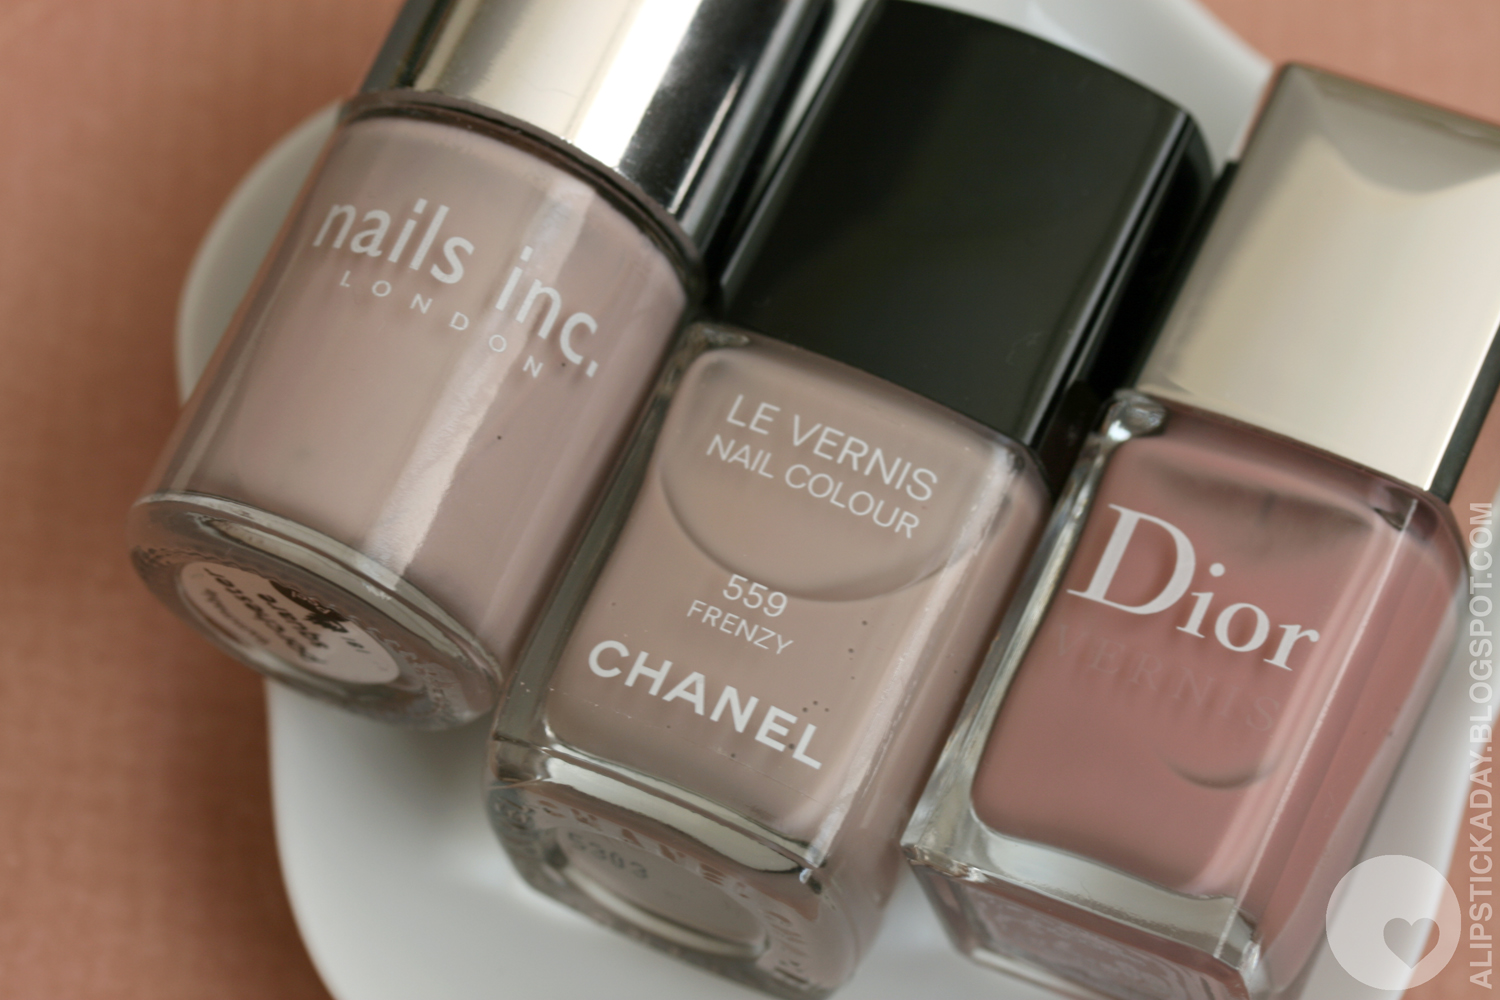 Chanel Le Vernis Longwear Nail Colour in Frenzy - wide 8